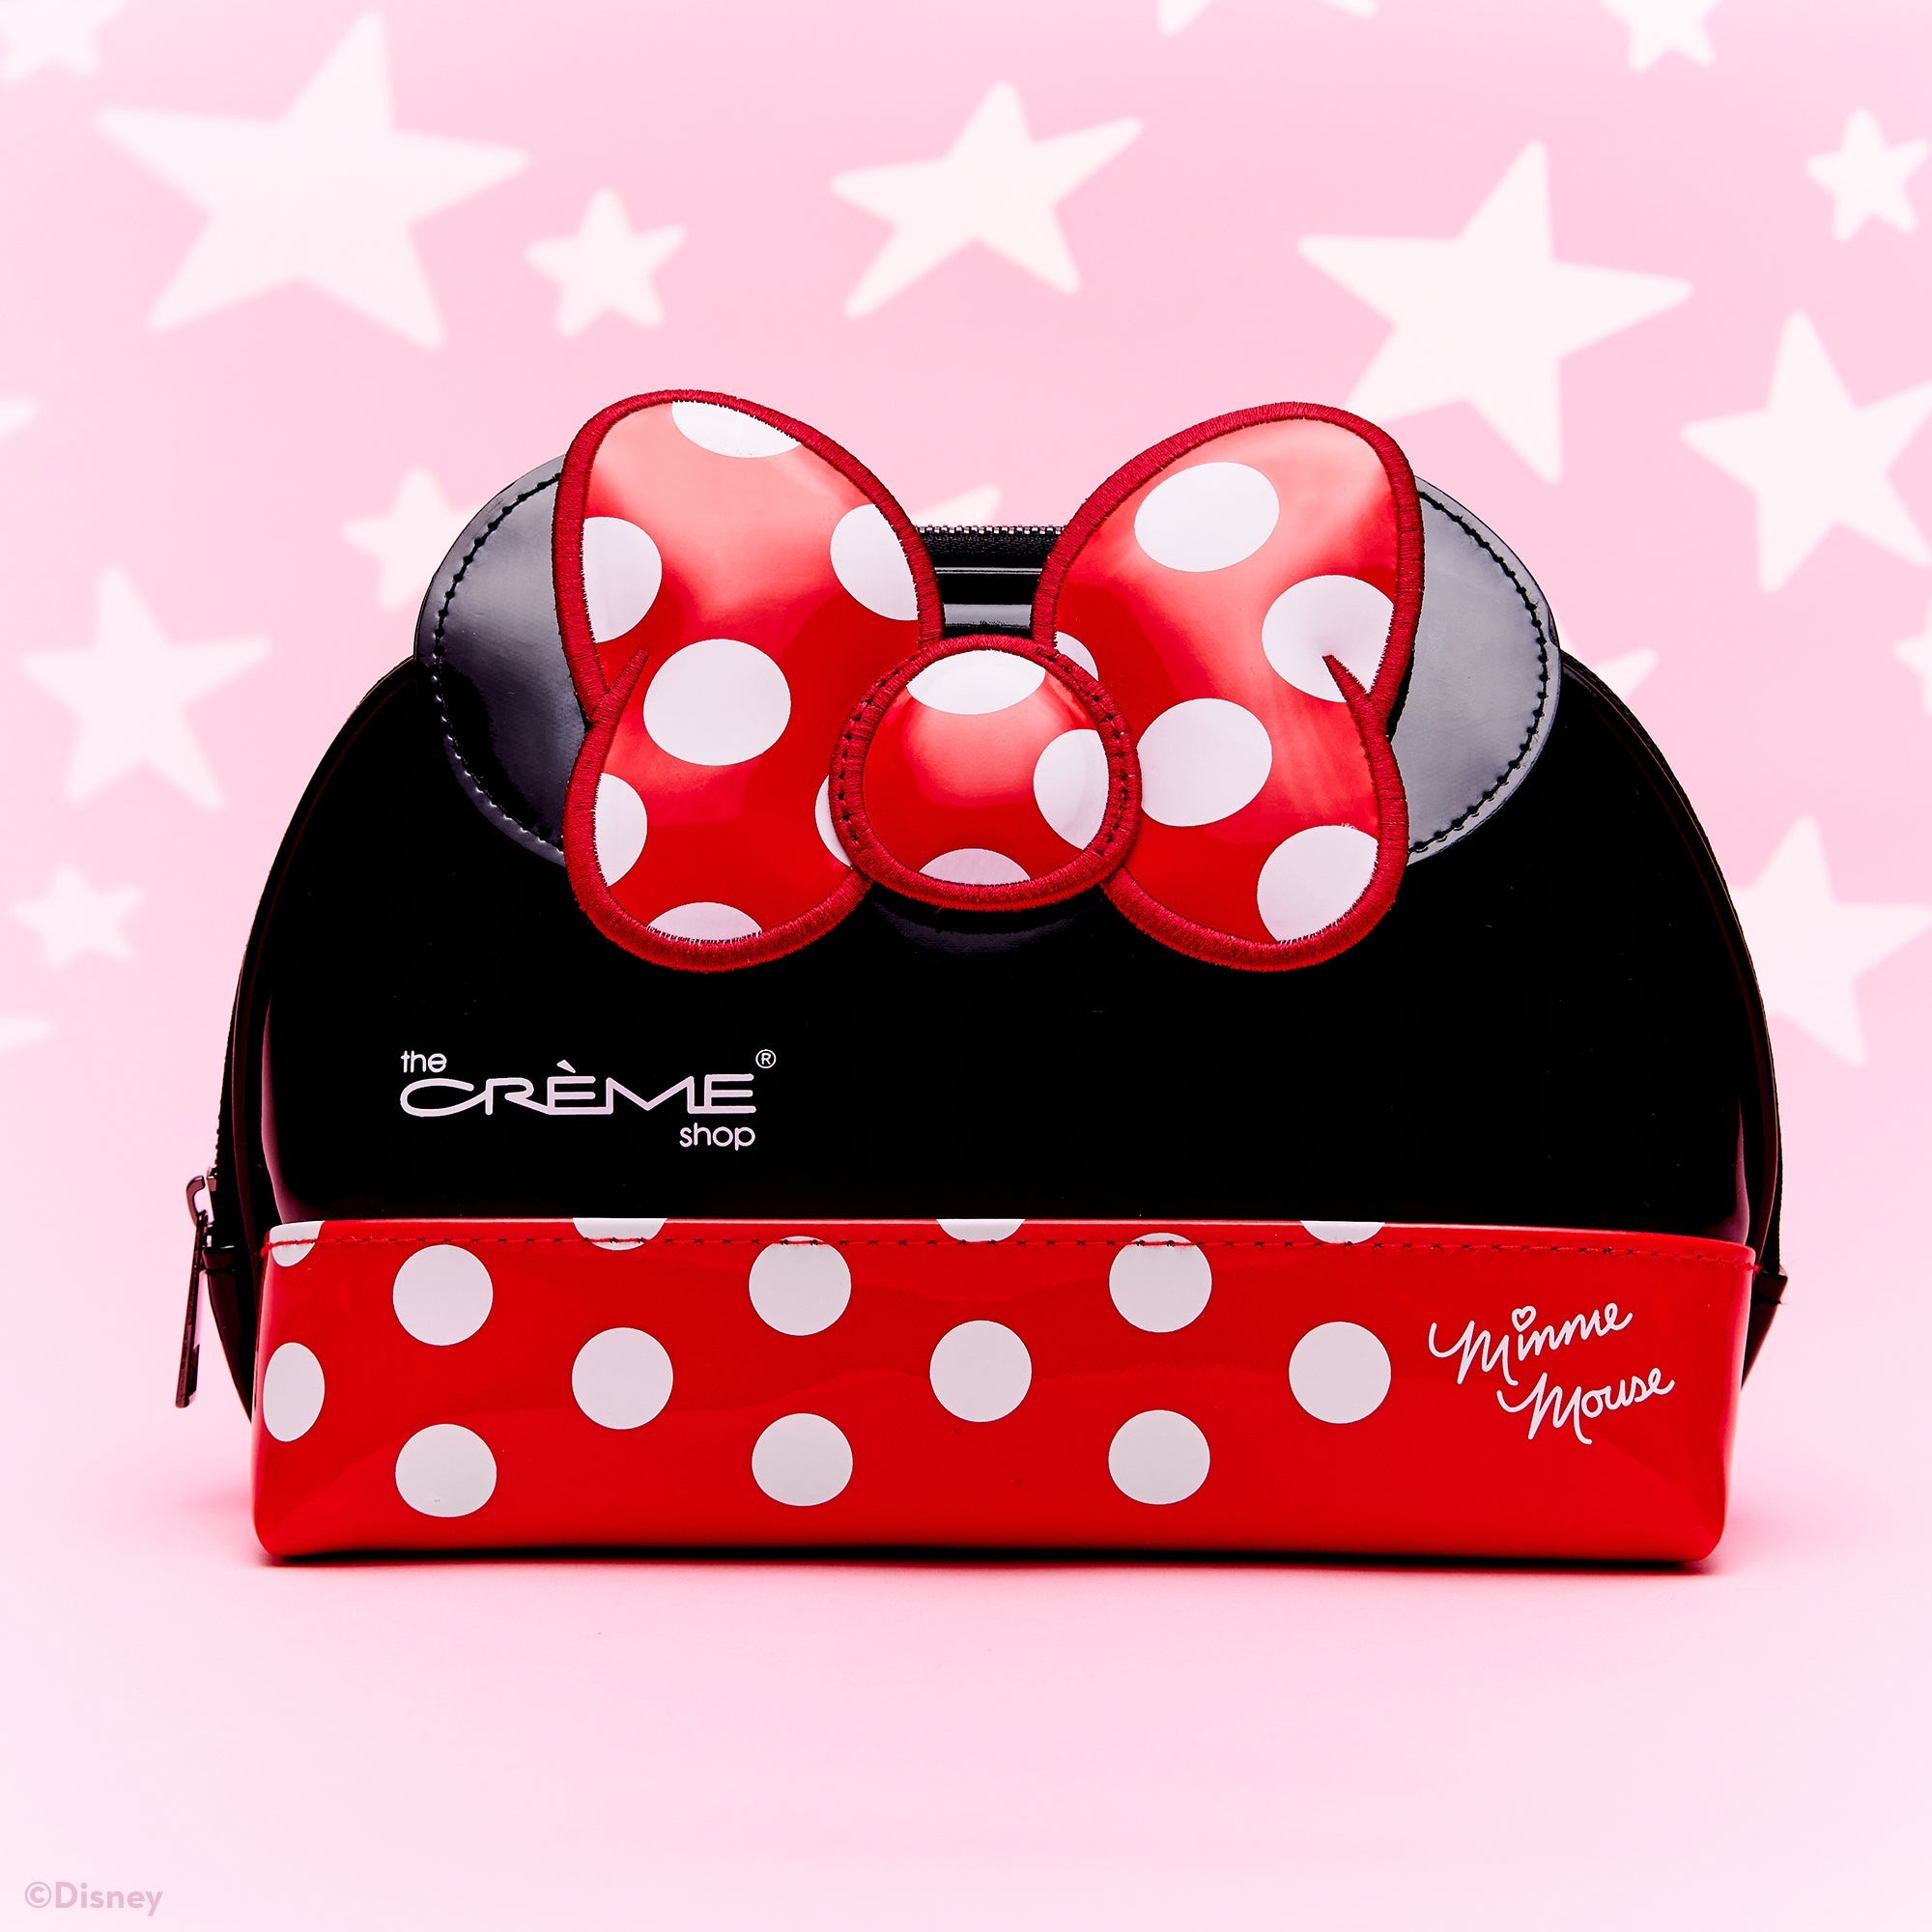 The Crme Shop Minnie Mouse Dome Travel Pouch (Red)